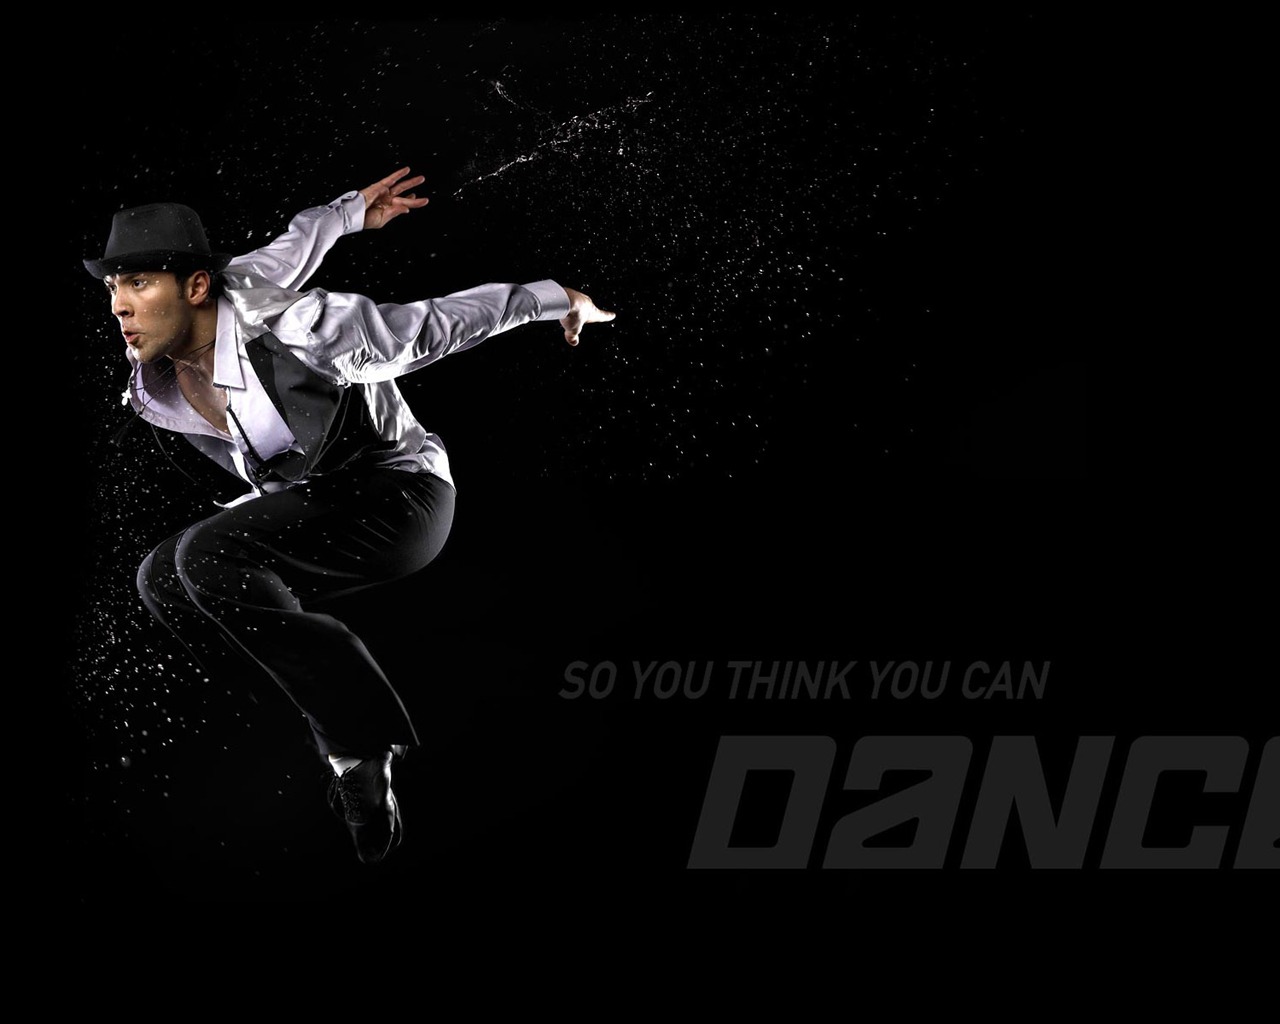 So You Think You Can Dance wallpaper (1) #12 - 1280x1024